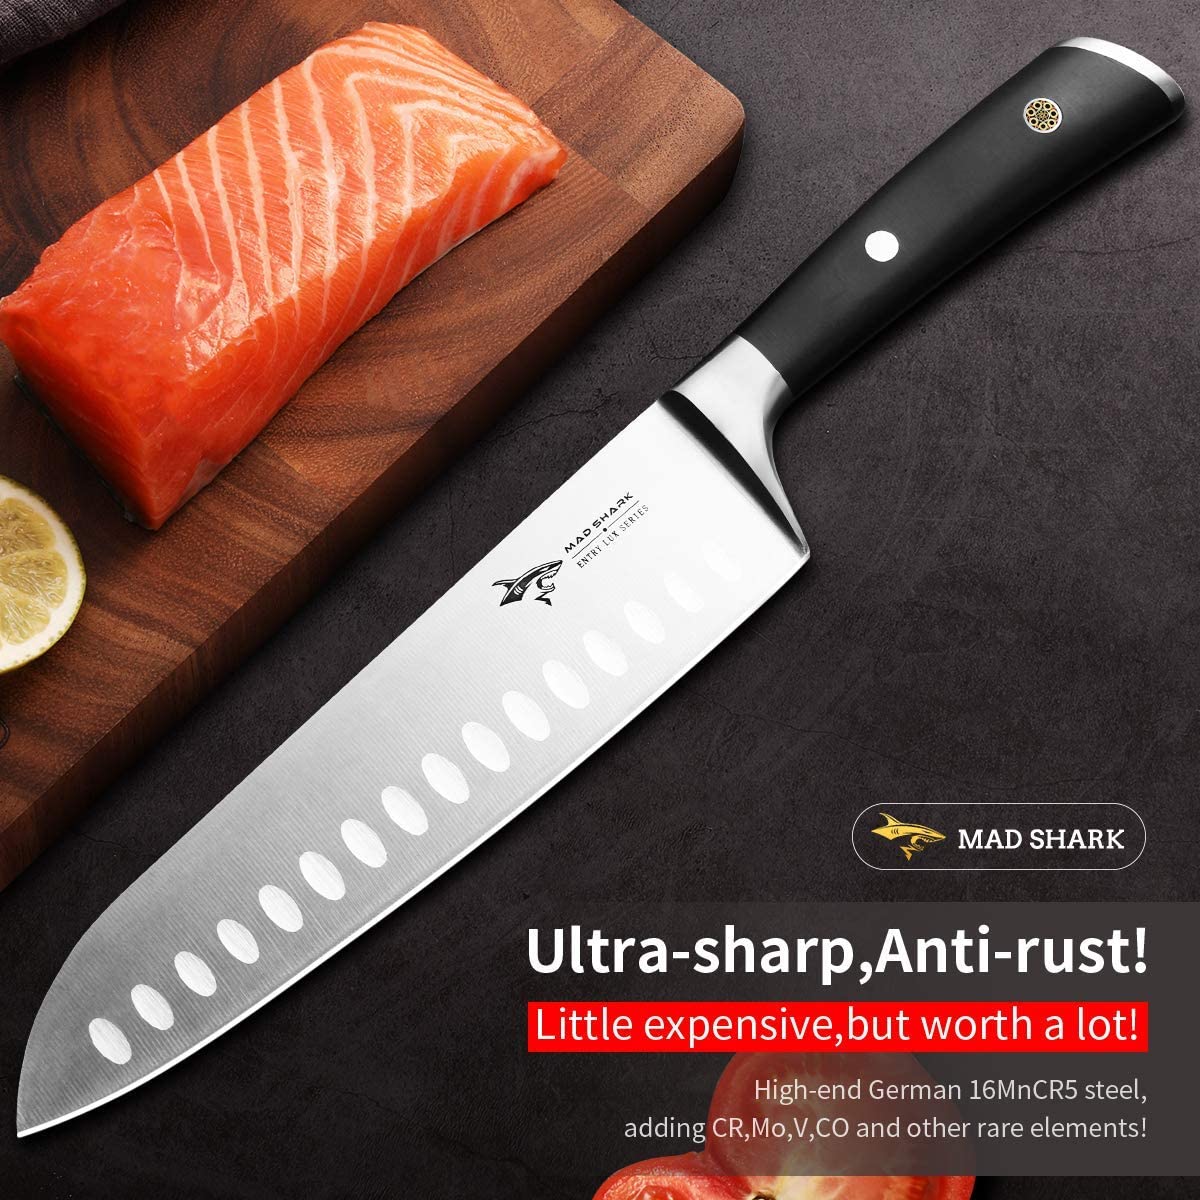 Santoku Knife Professional - MAD SHARK Chefs Knife 8 Inch Japanese Kitchen Knives,Best Quality German Carbon Stainless Steel Knife with Ergonomic Handle,Ultra Sharp,Best for Home and Restaurant 